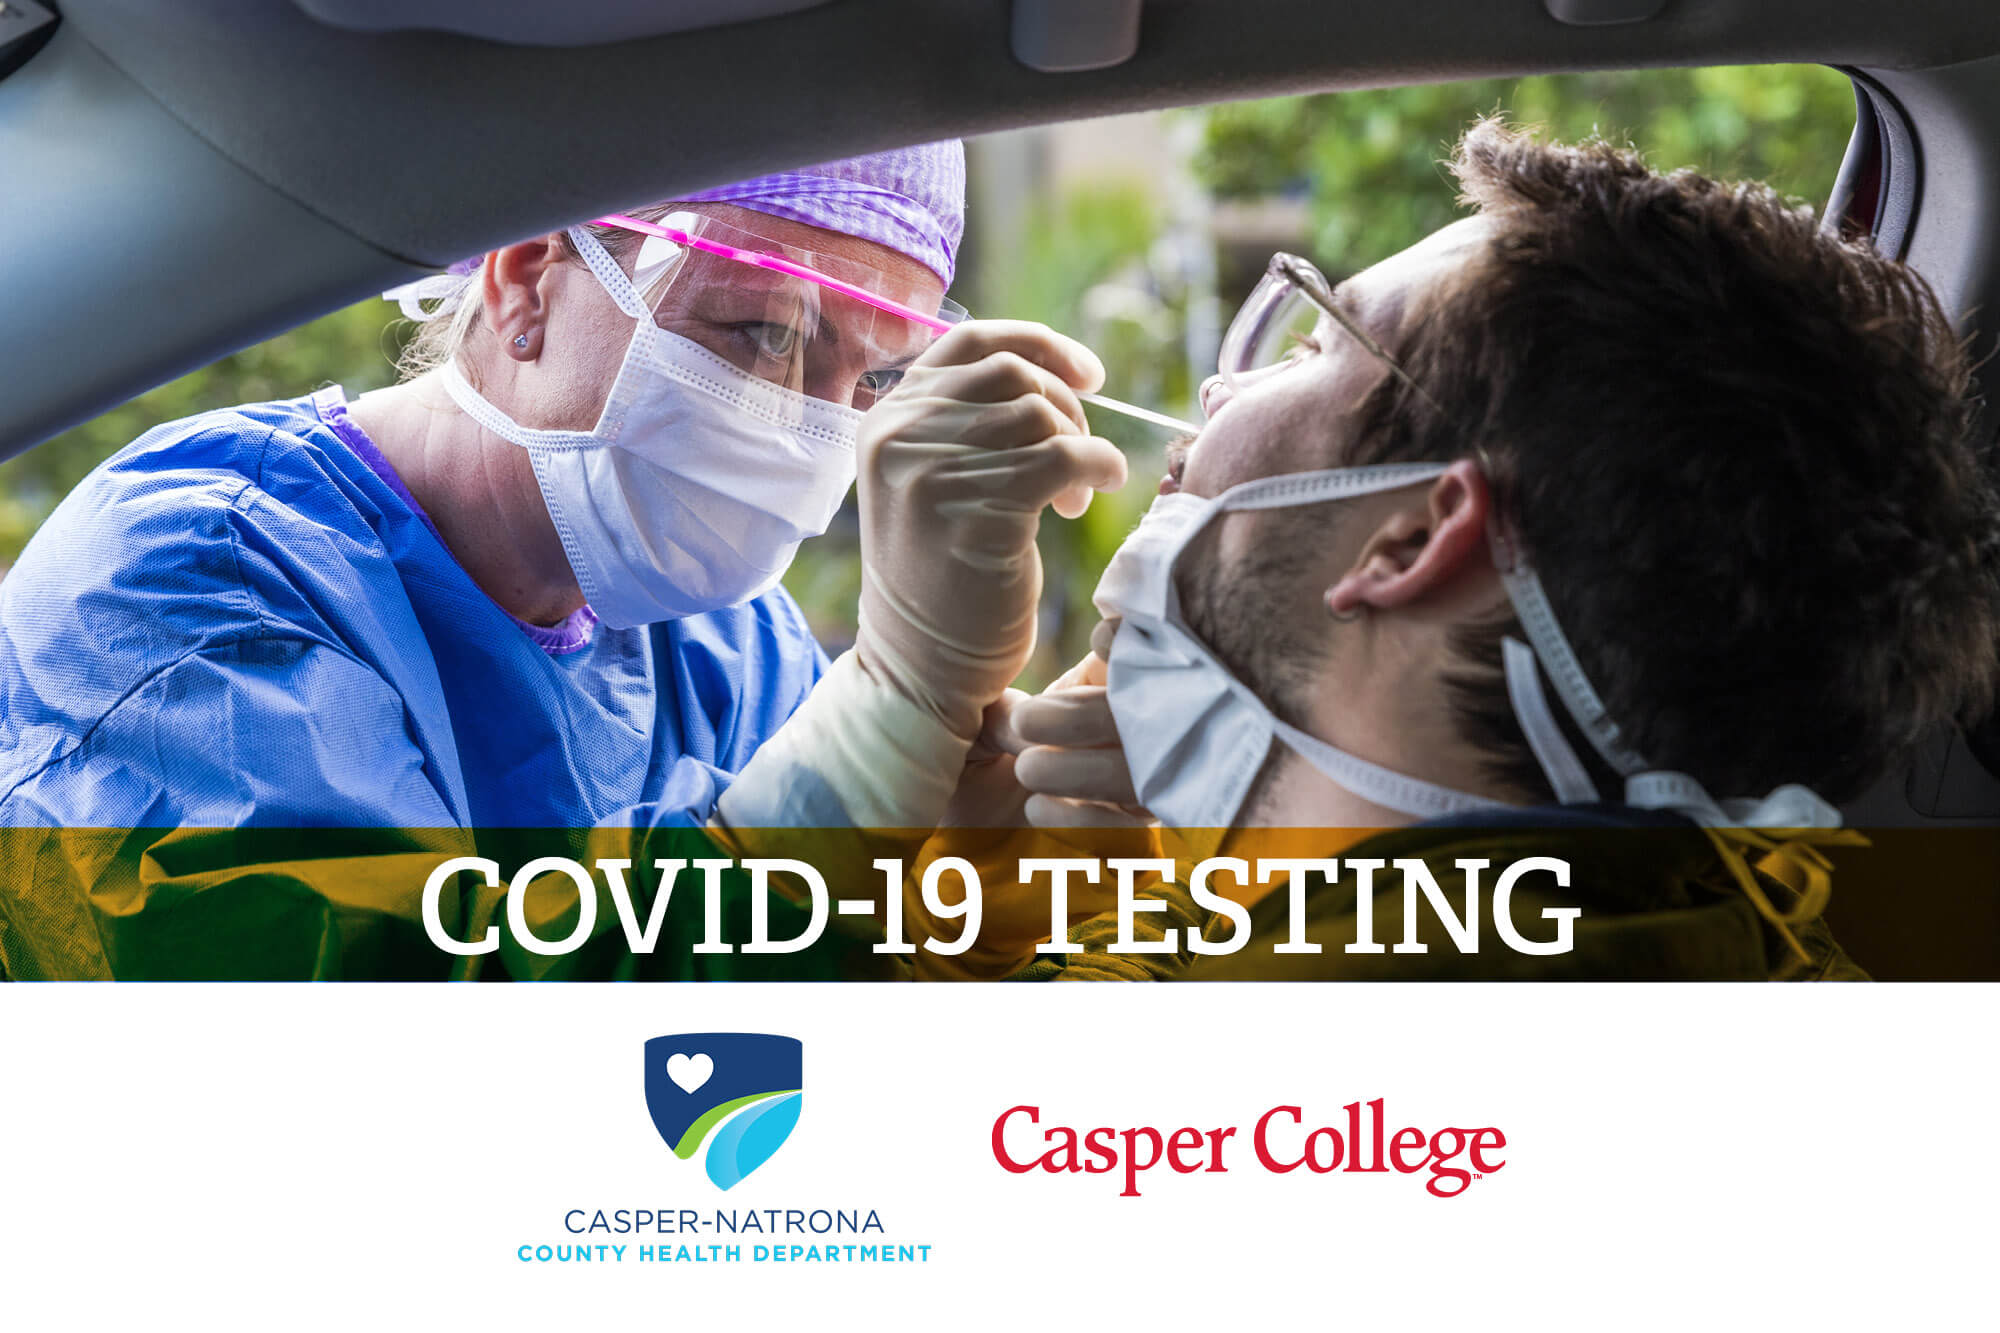 Photo of a person receiving a nasal COVID-19 test with the words "COVID-19 Testing."